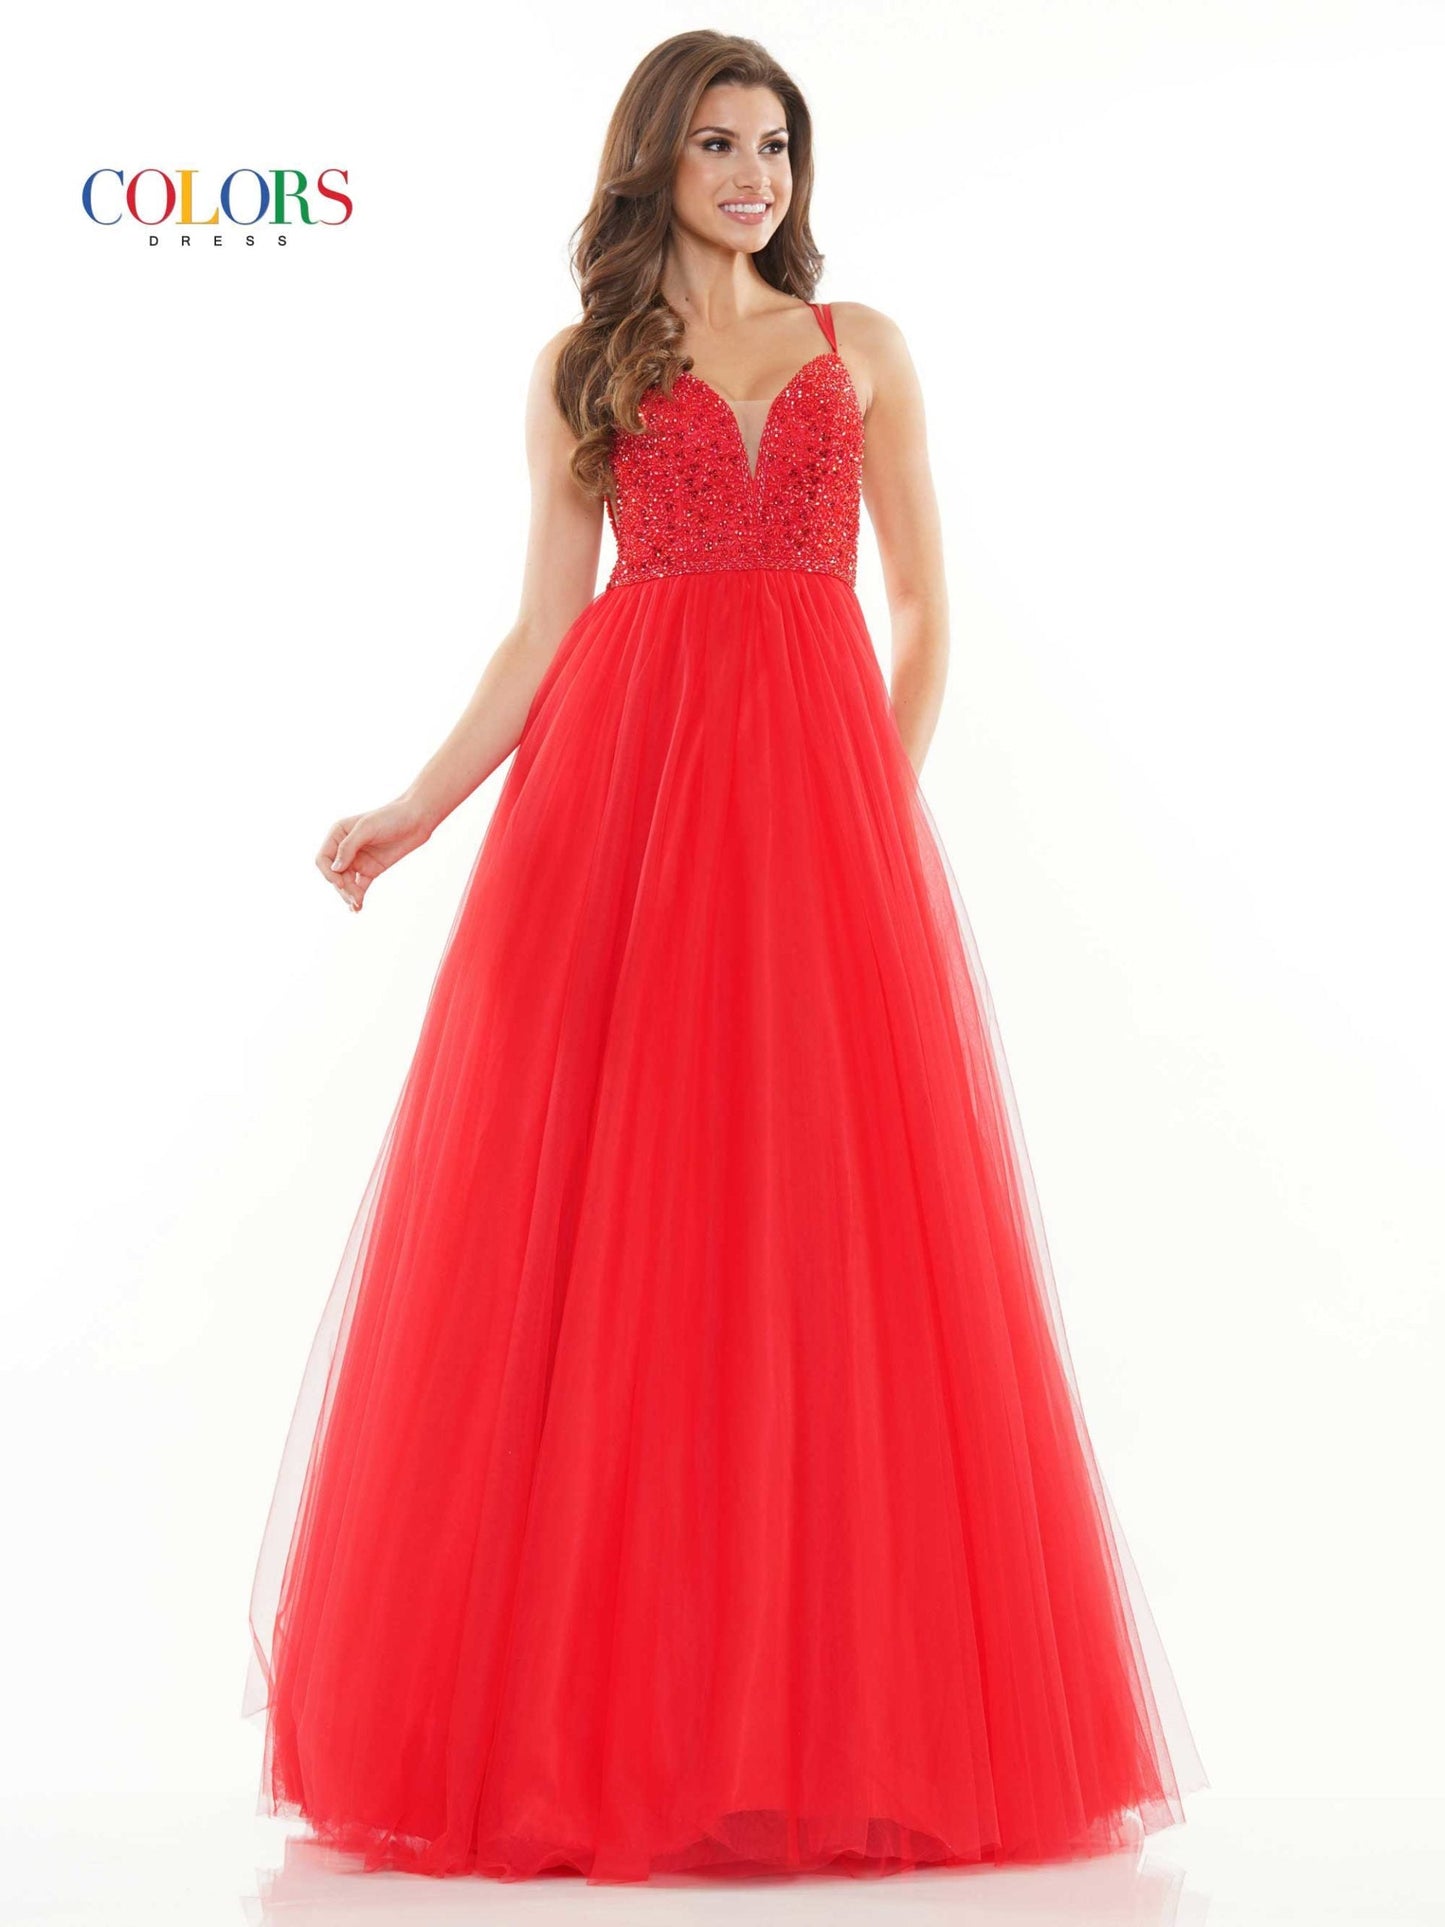 2382 COLORS Dress - RED